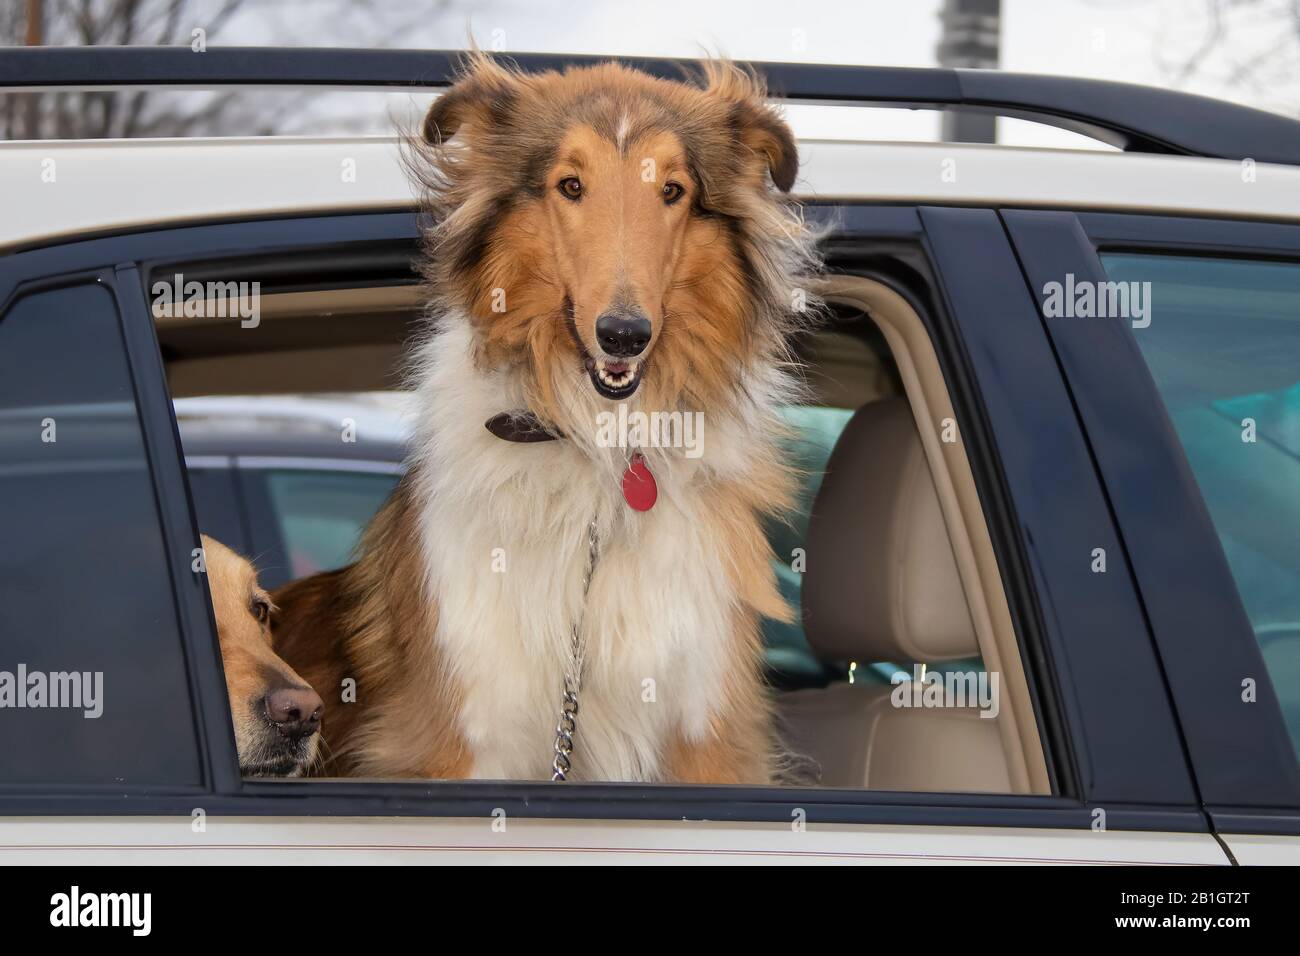 Beautiful Collie Dog looks out car window with wind blowing its hair while golden retriever peeks out beside it Stock Photo